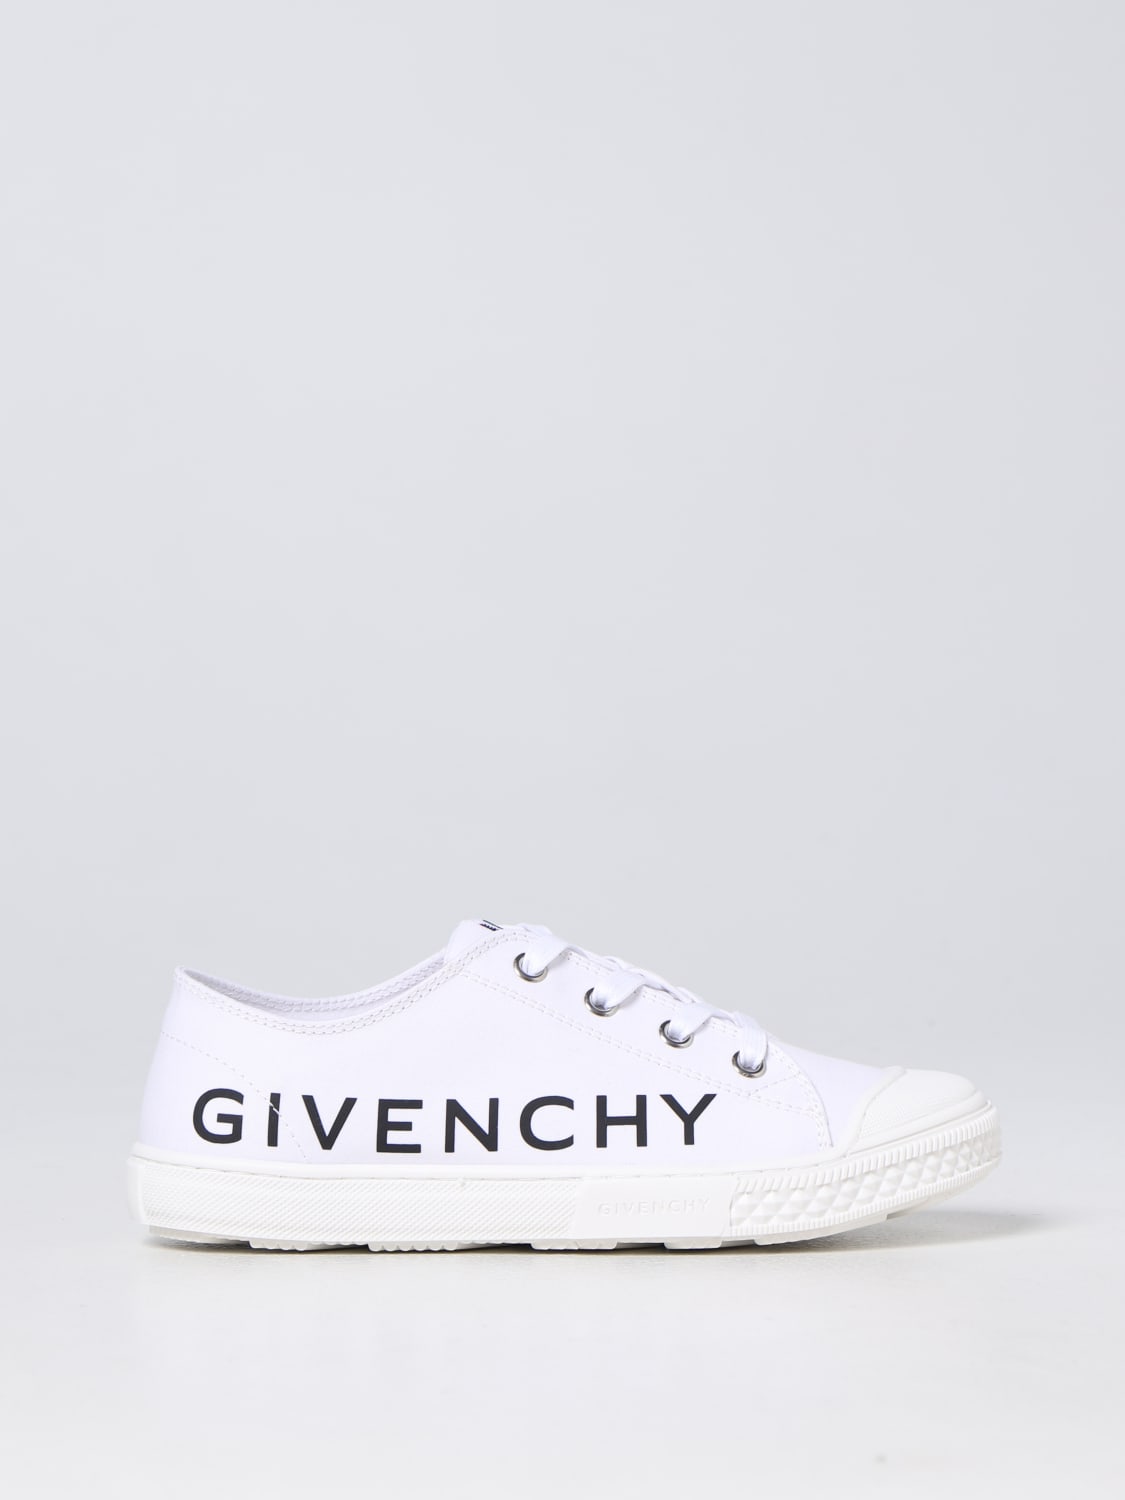 sang Skyldfølelse beslutte GIVENCHY: sneakers in canvas - White | Givenchy shoes H29085 online on  GIGLIO.COM